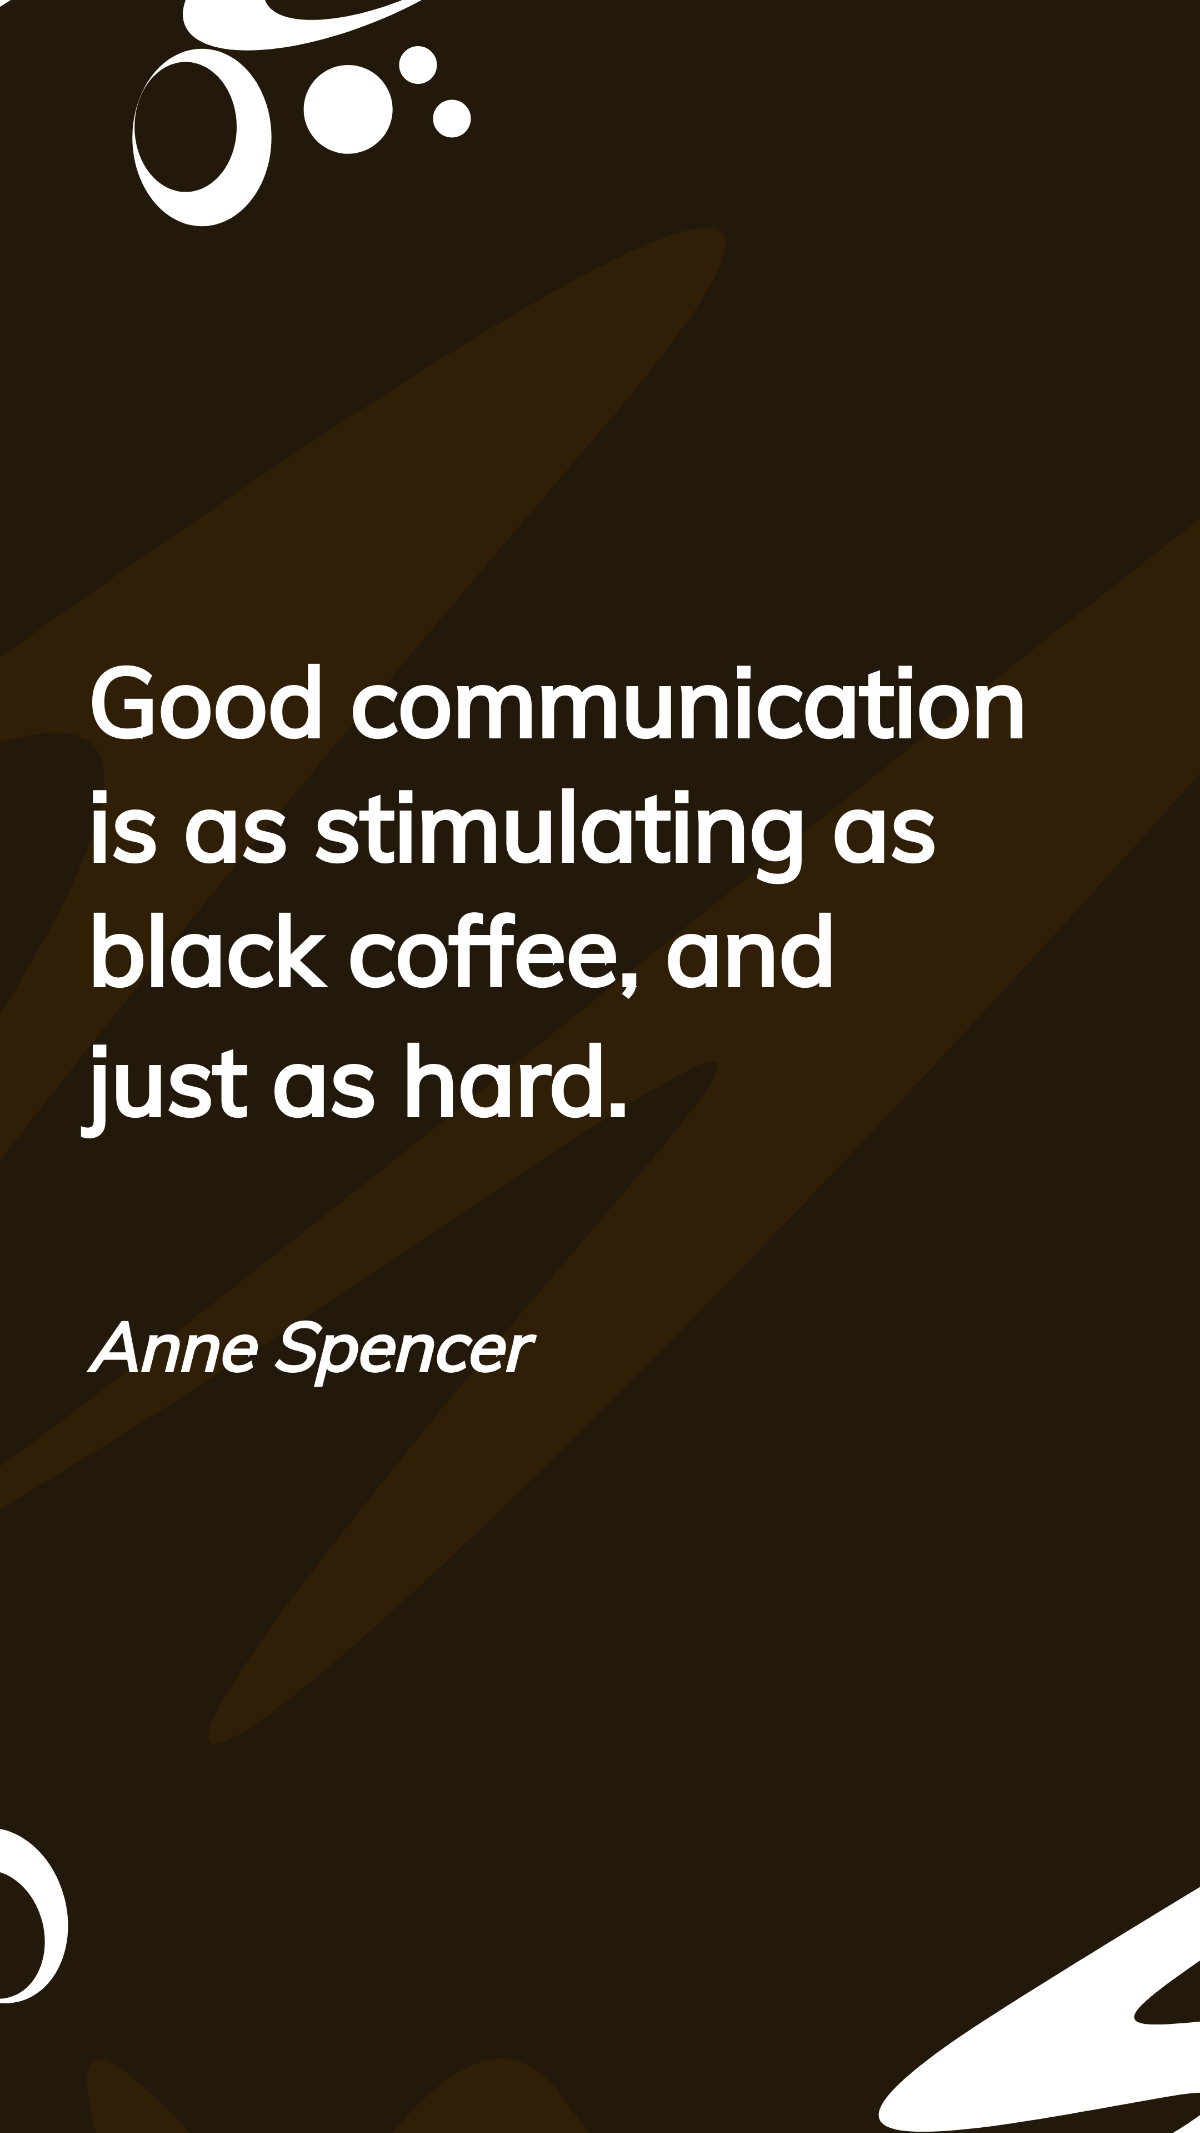 Anne Spencer - Good communication is as stimulating as black coffee, and just as hard. Template